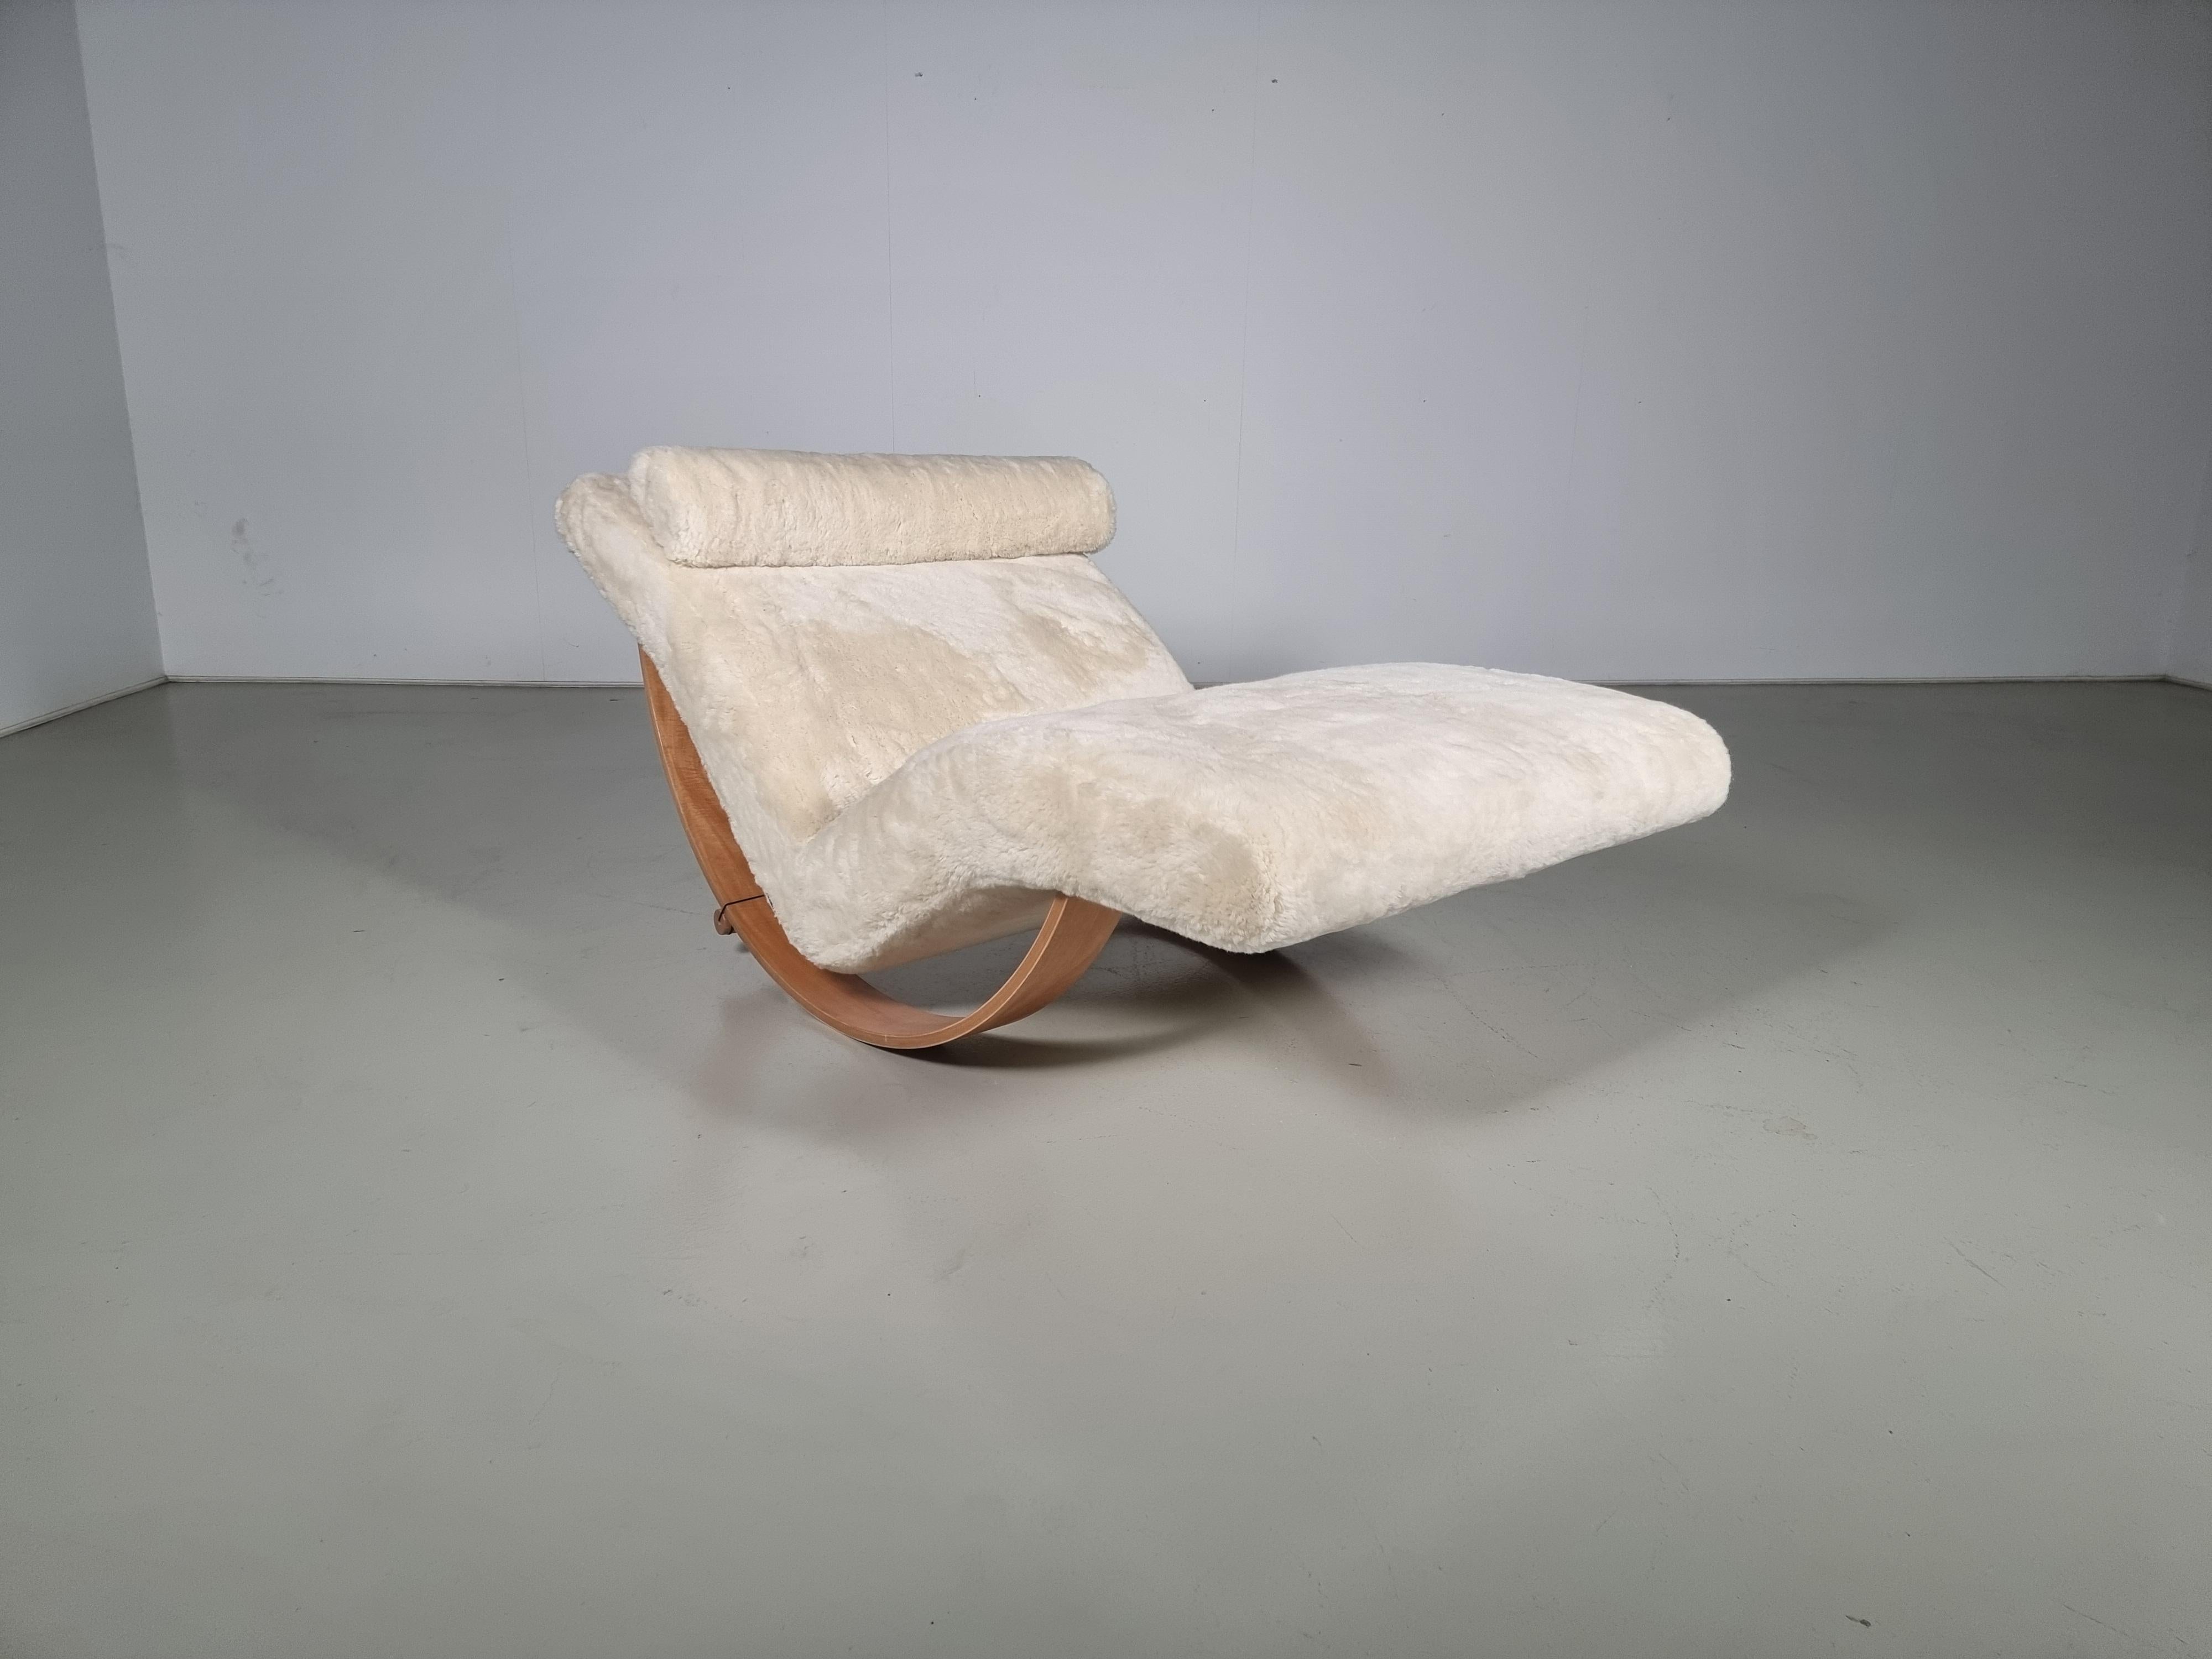 Gabbiano by Giovannetti is a rocking chair shaped like a seagull's wings.

The mix of its materials, combined with the sensuality and charm of its movement, gives Gabbiano the fascination of a relaxing island.

Base in curved natural plywood.